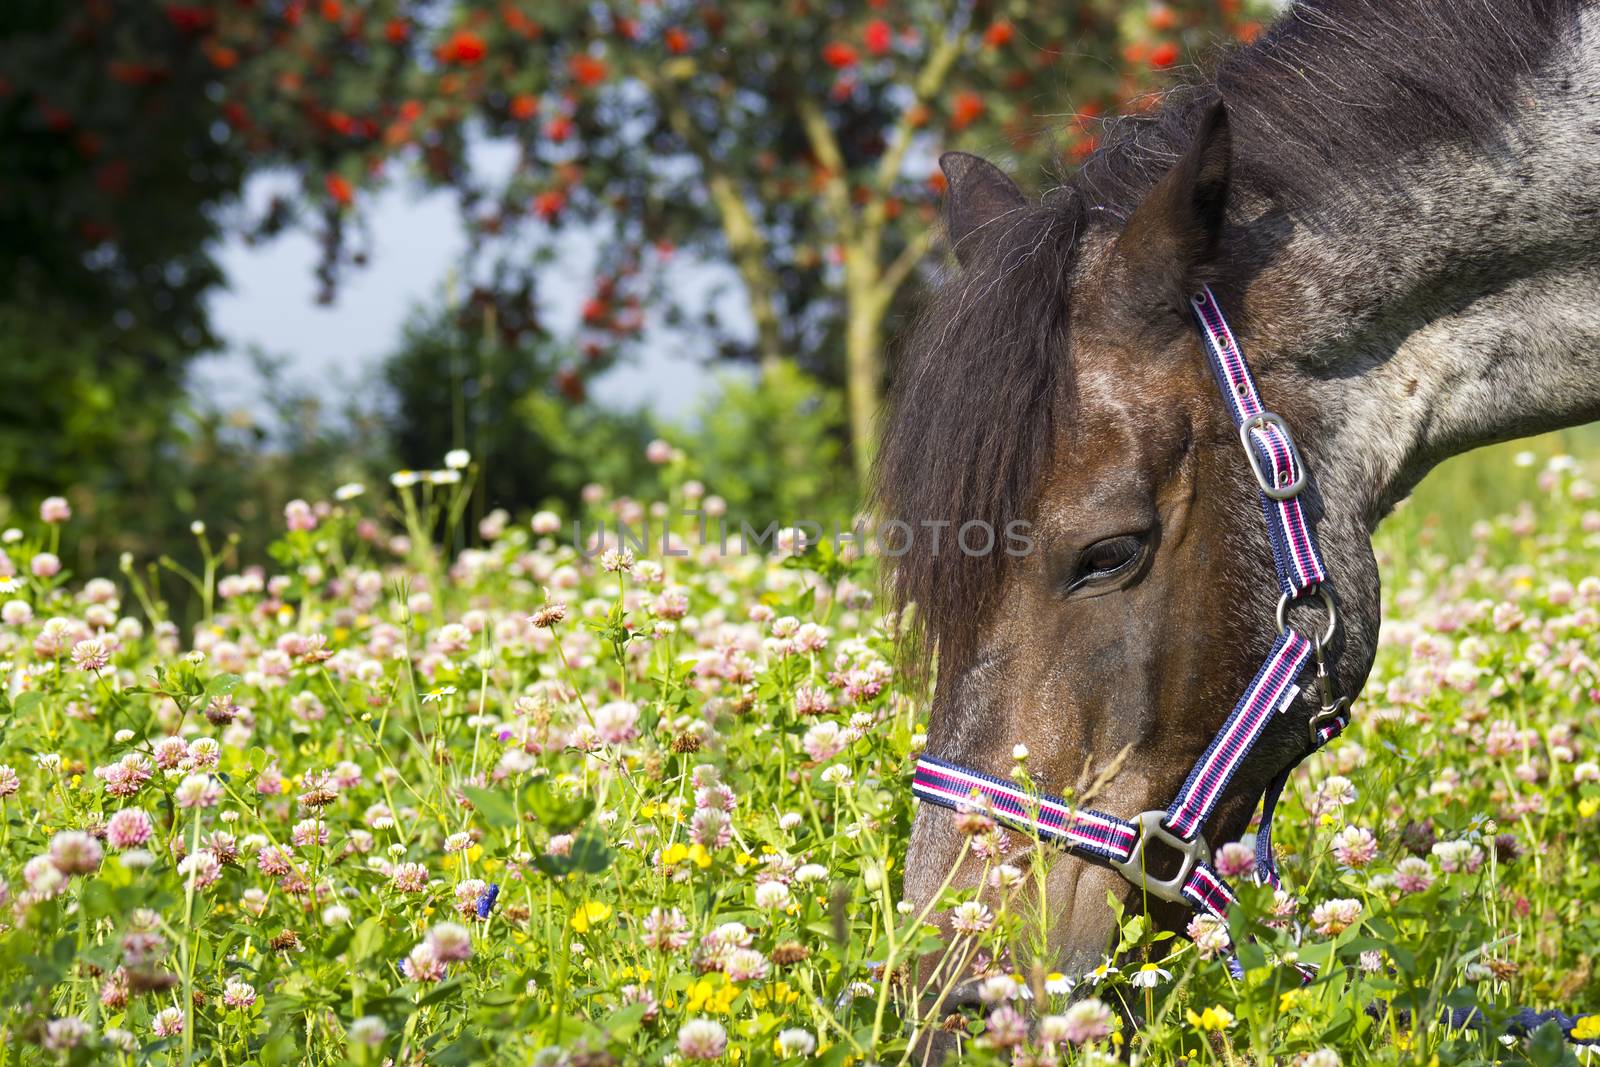 grazing horse in a meadow  by miradrozdowski